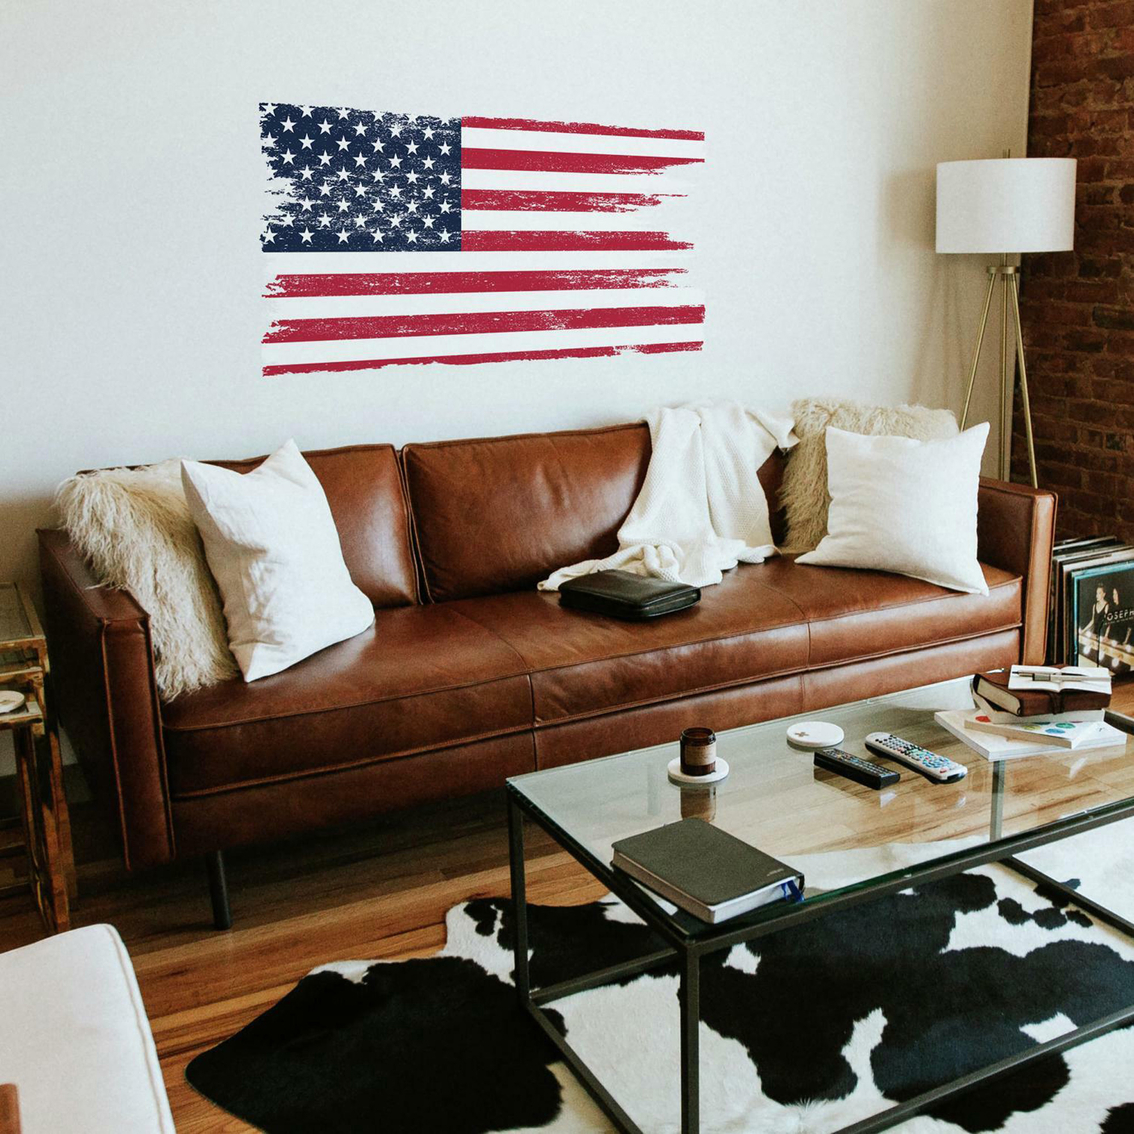 RoomMates Distressed American Flag Giant Peel and Stick Wall Decals - Image 5 of 5